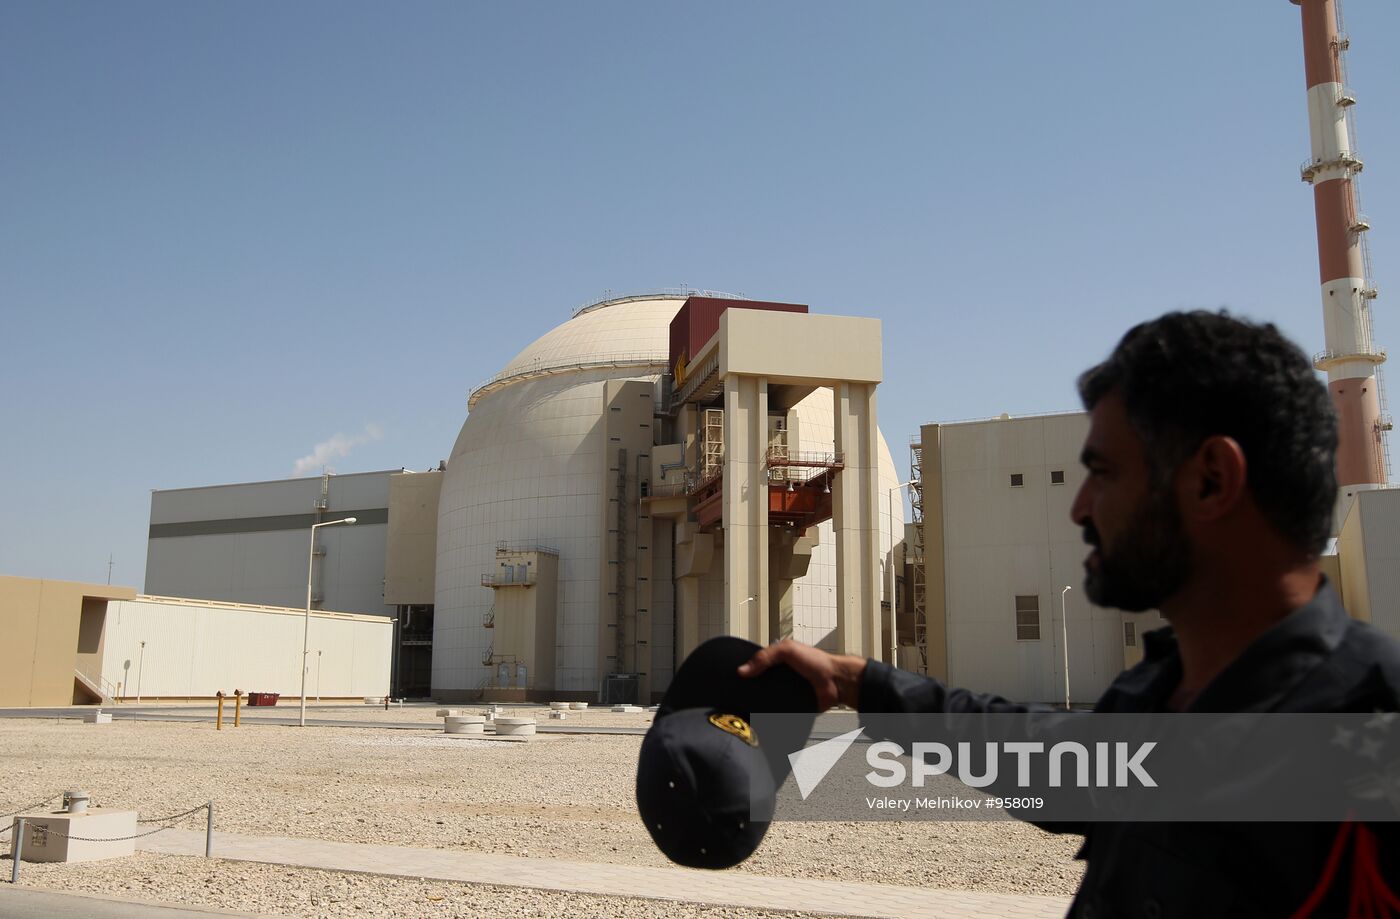 Bushehr Nuclear Power Plant launched